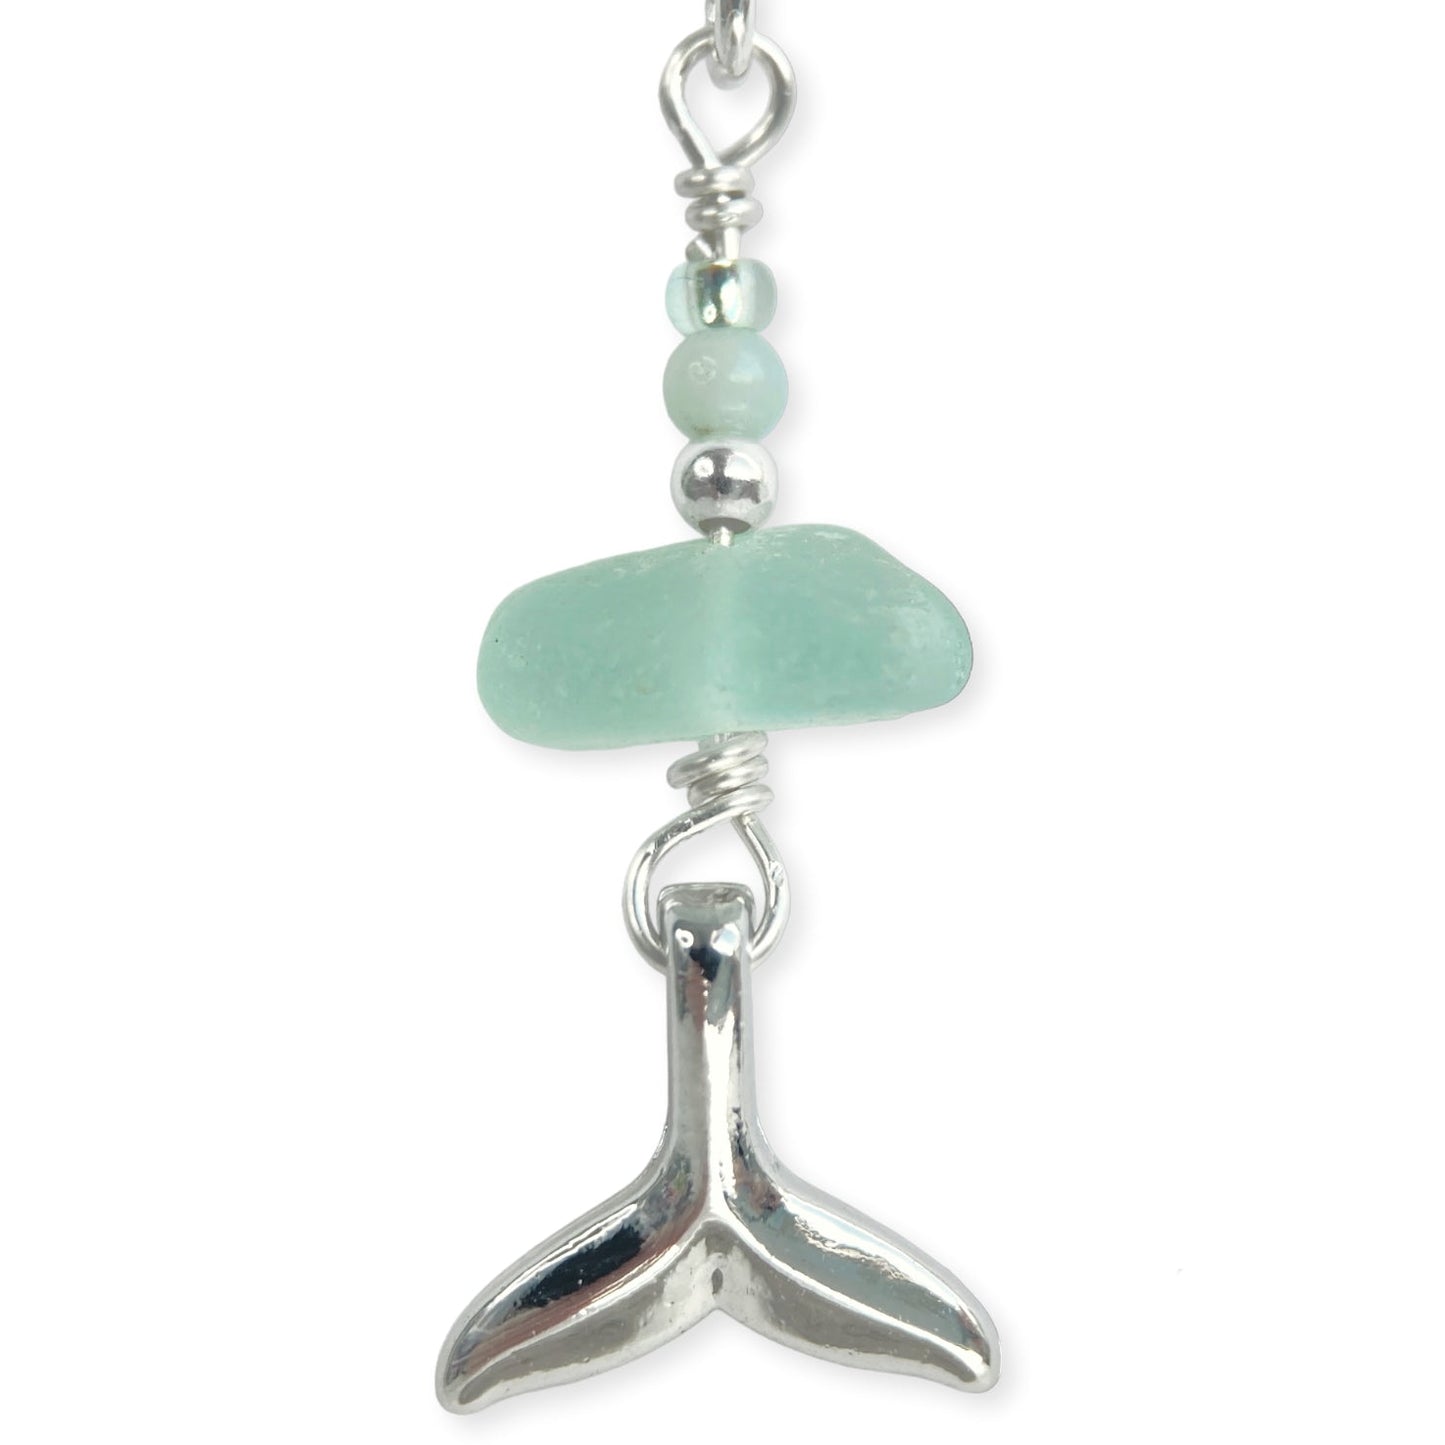 Whale Tail Earrings - Green Sea Glass & Silver Jewellery with Amazonite Crystal Beads - East Neuk Beach Crafts